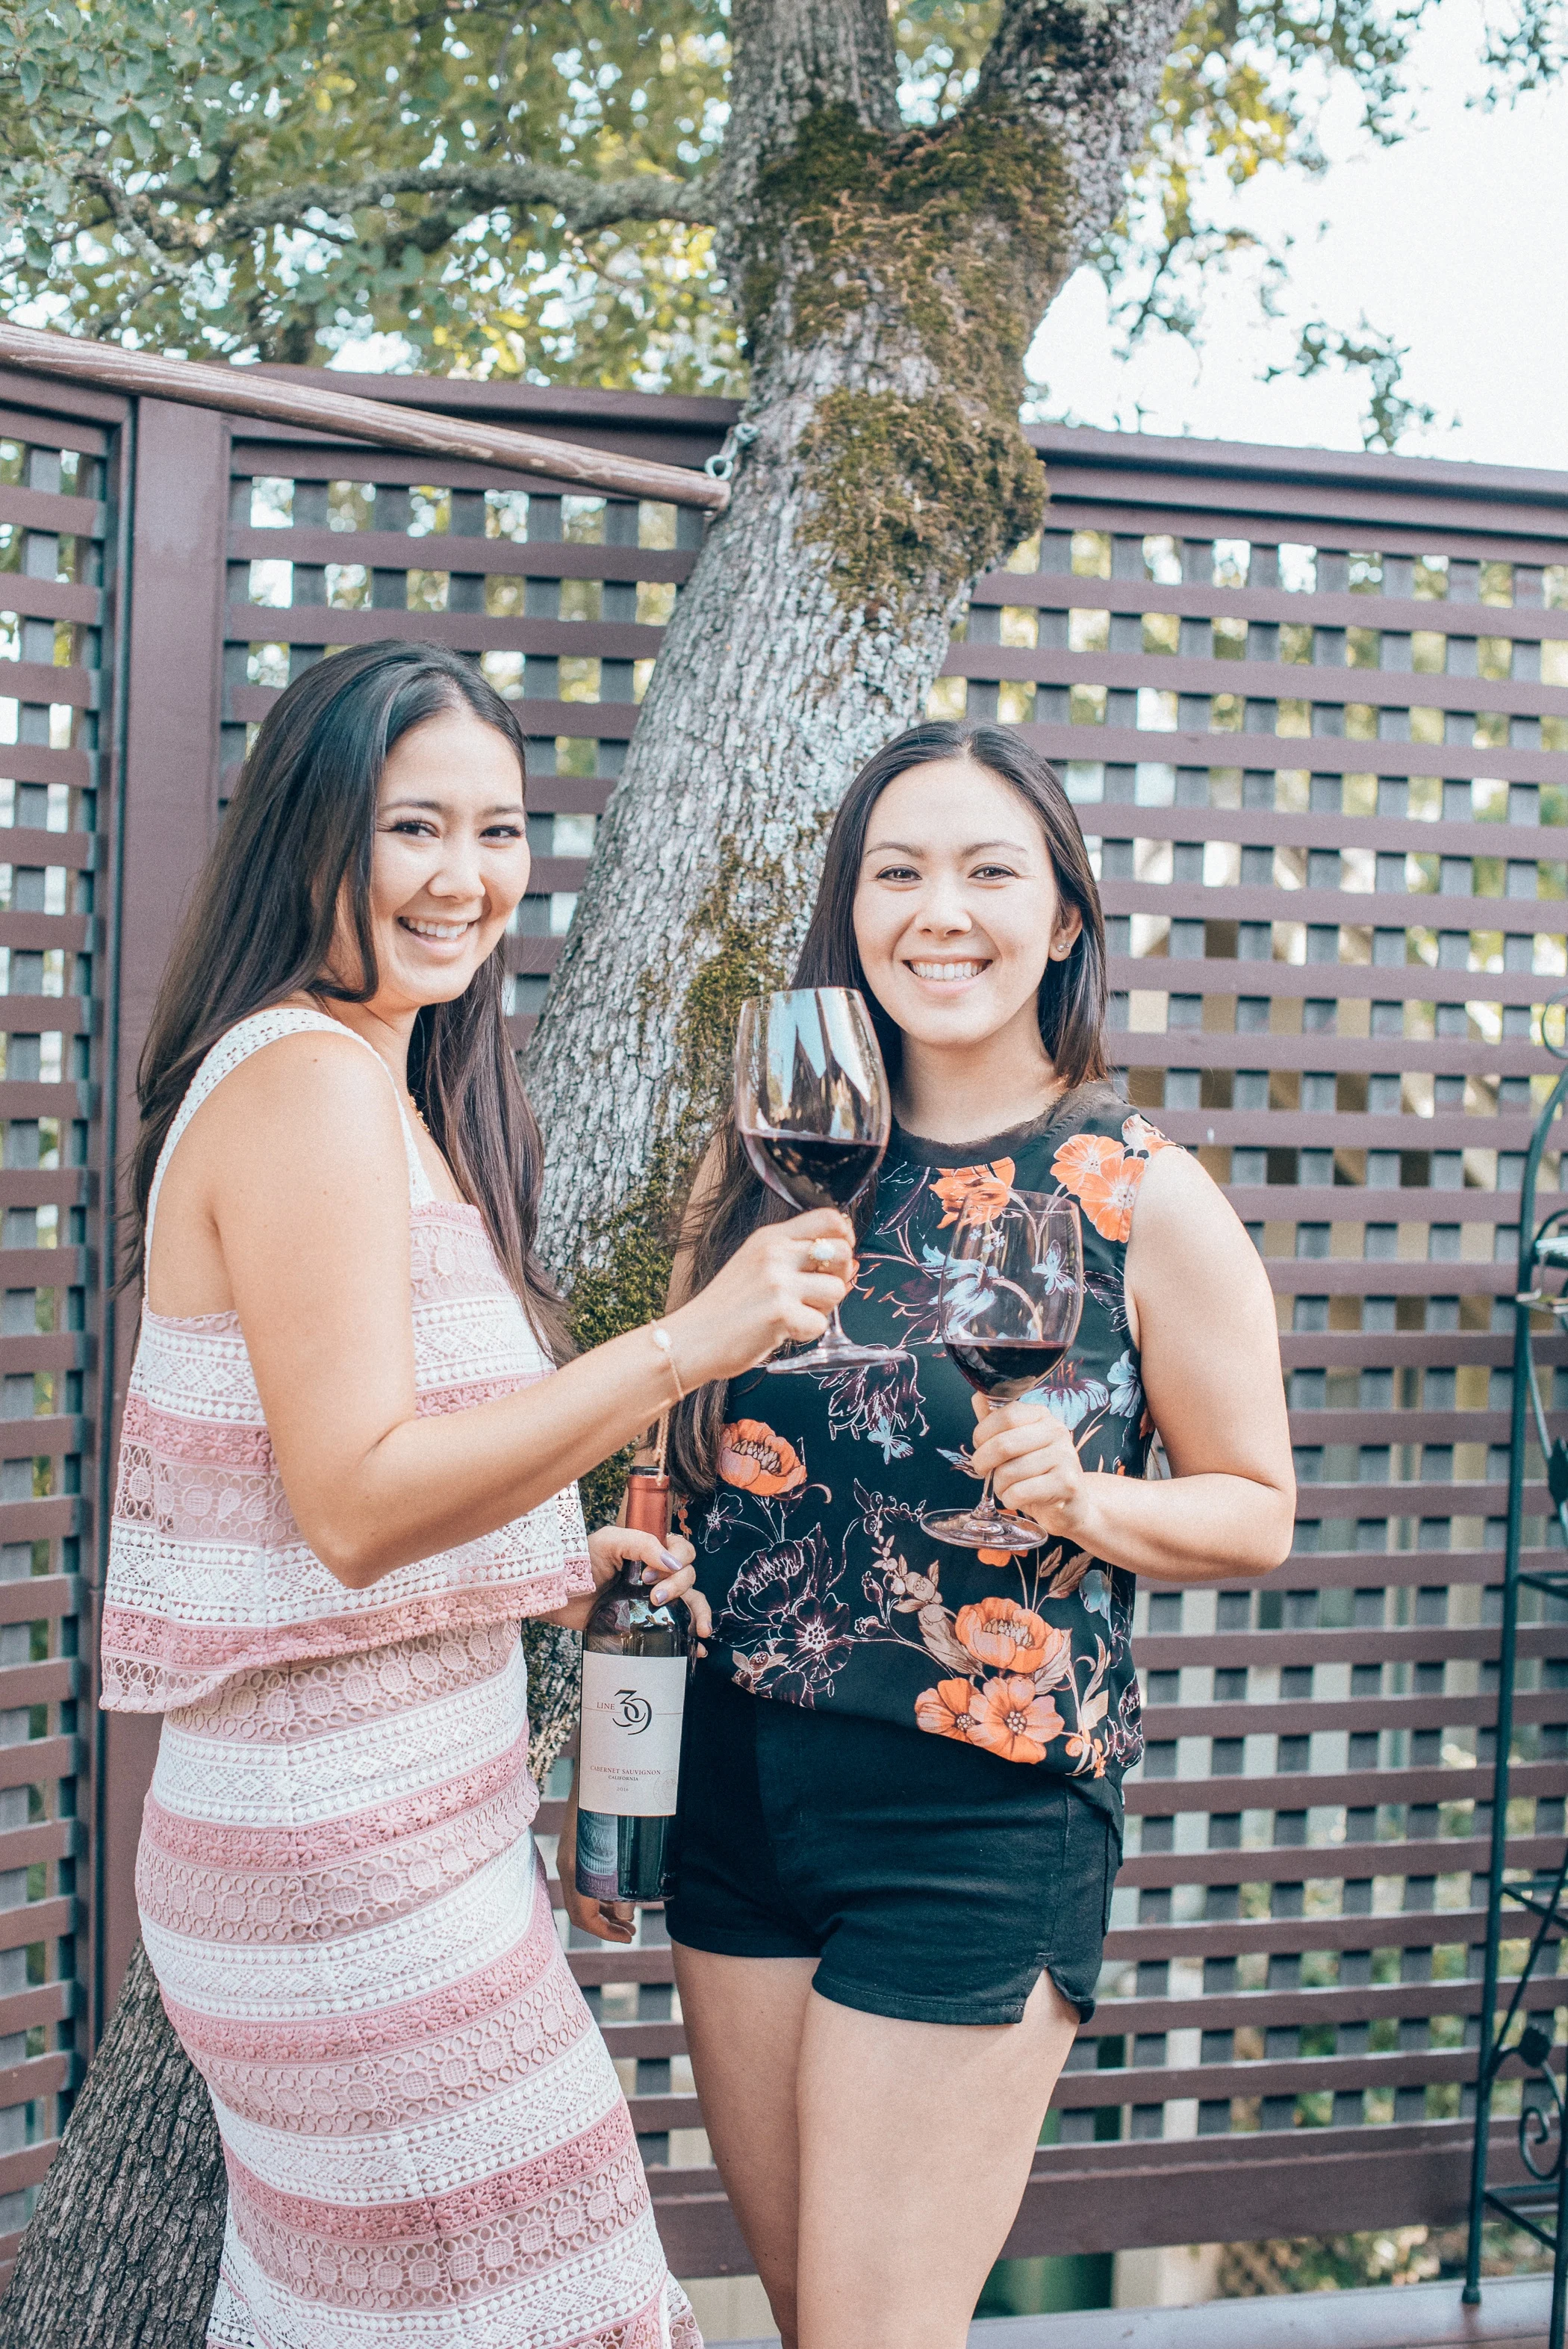 Summer BBQ with Line 39 Wine featured by popular San Francisco lifestyle blogger, WTFAb